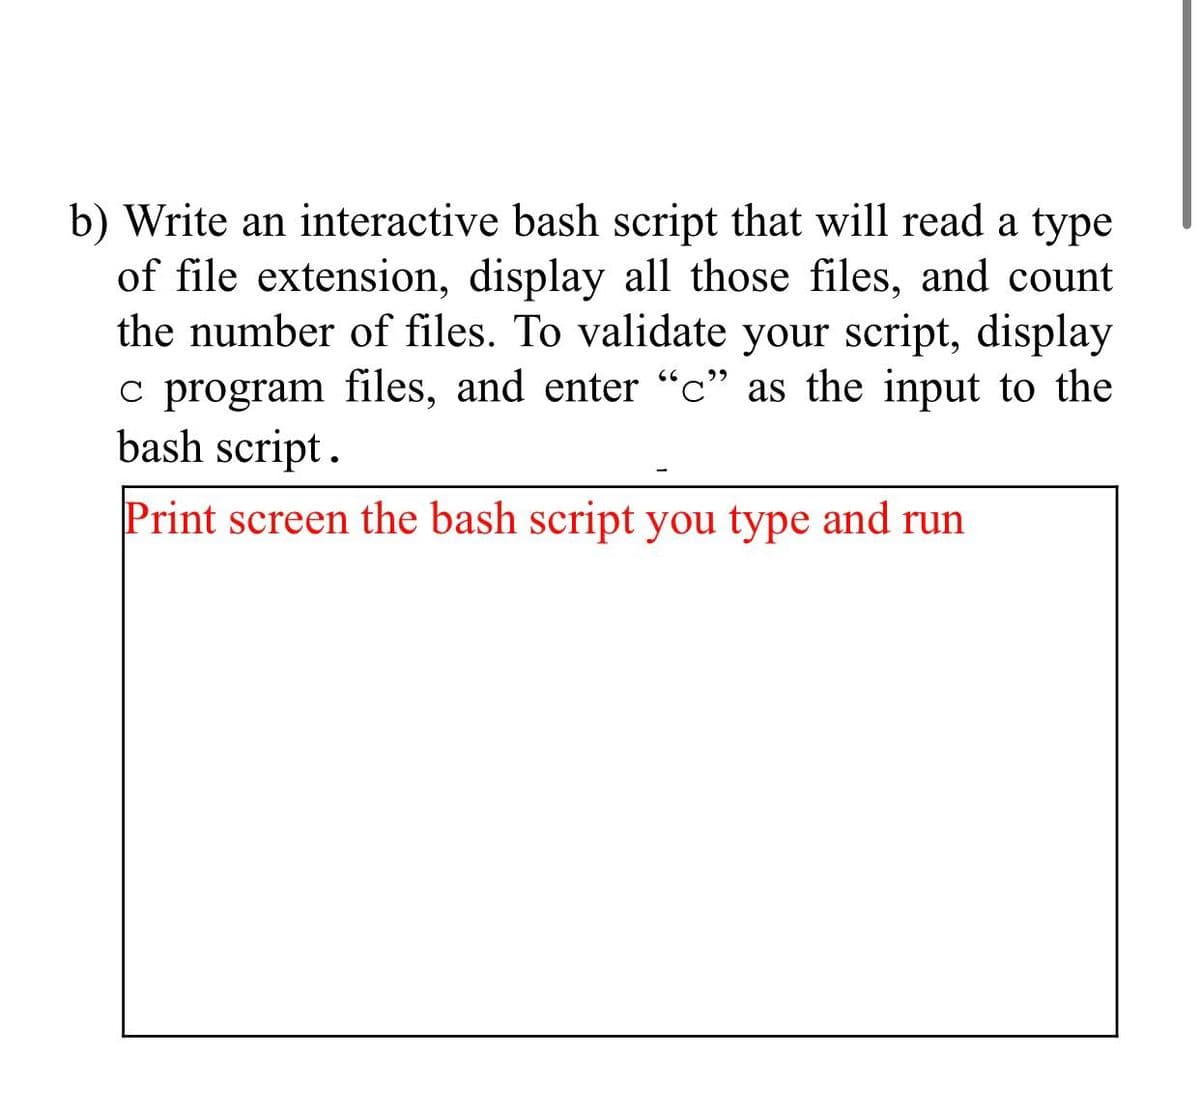 b) Write an interactive bash script that will read a type
of file extension, display all those files, and count
the number of files. To validate your script, display
66
c program files, and enter "c" as the input to the
bash script.
Print screen the bash script you type and run